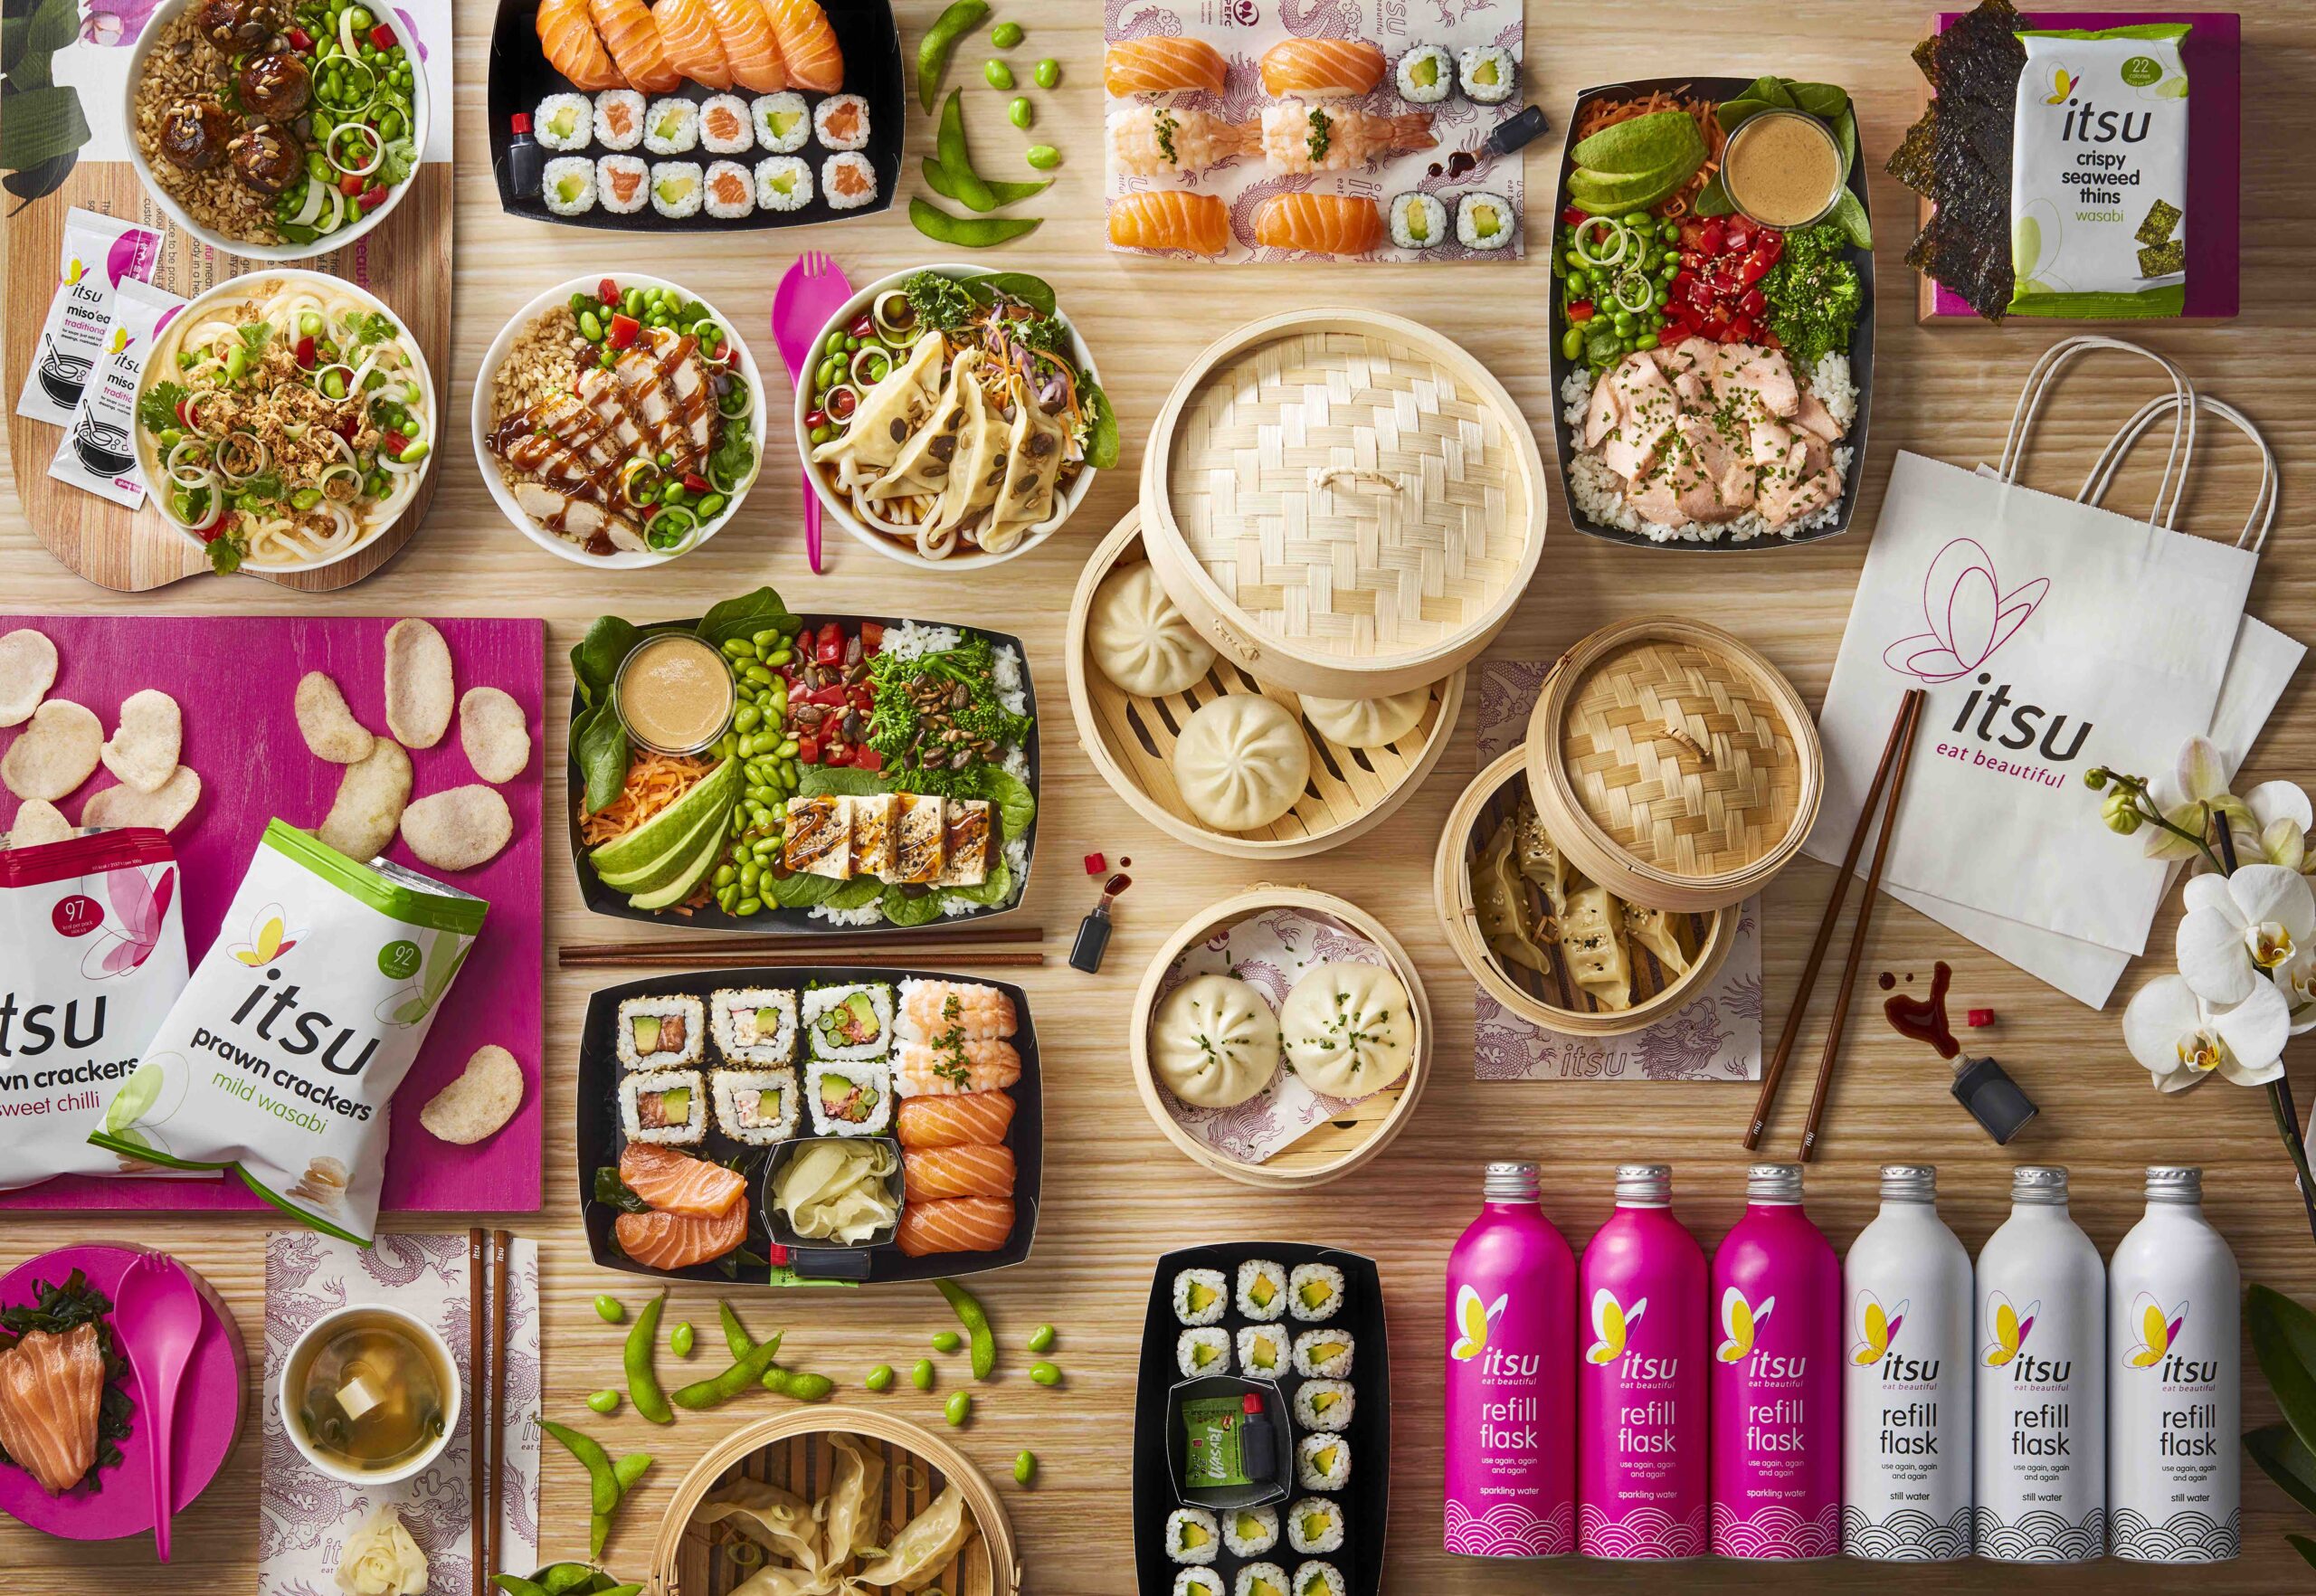 itsu is now on the menu at centre:mk